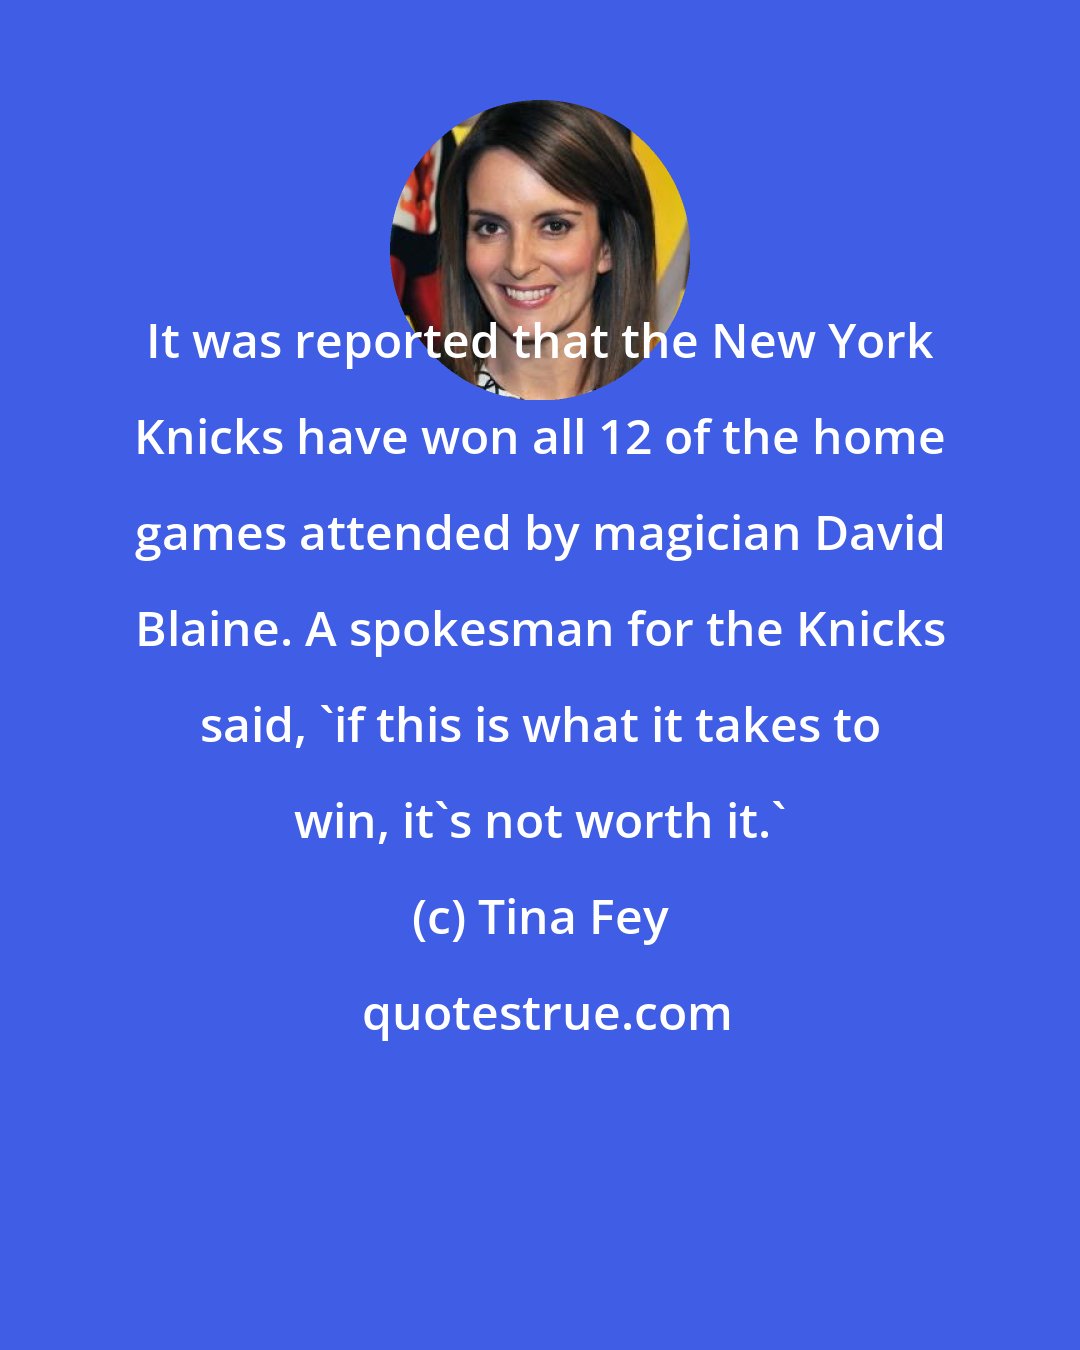 Tina Fey: It was reported that the New York Knicks have won all 12 of the home games attended by magician David Blaine. A spokesman for the Knicks said, 'if this is what it takes to win, it's not worth it.'